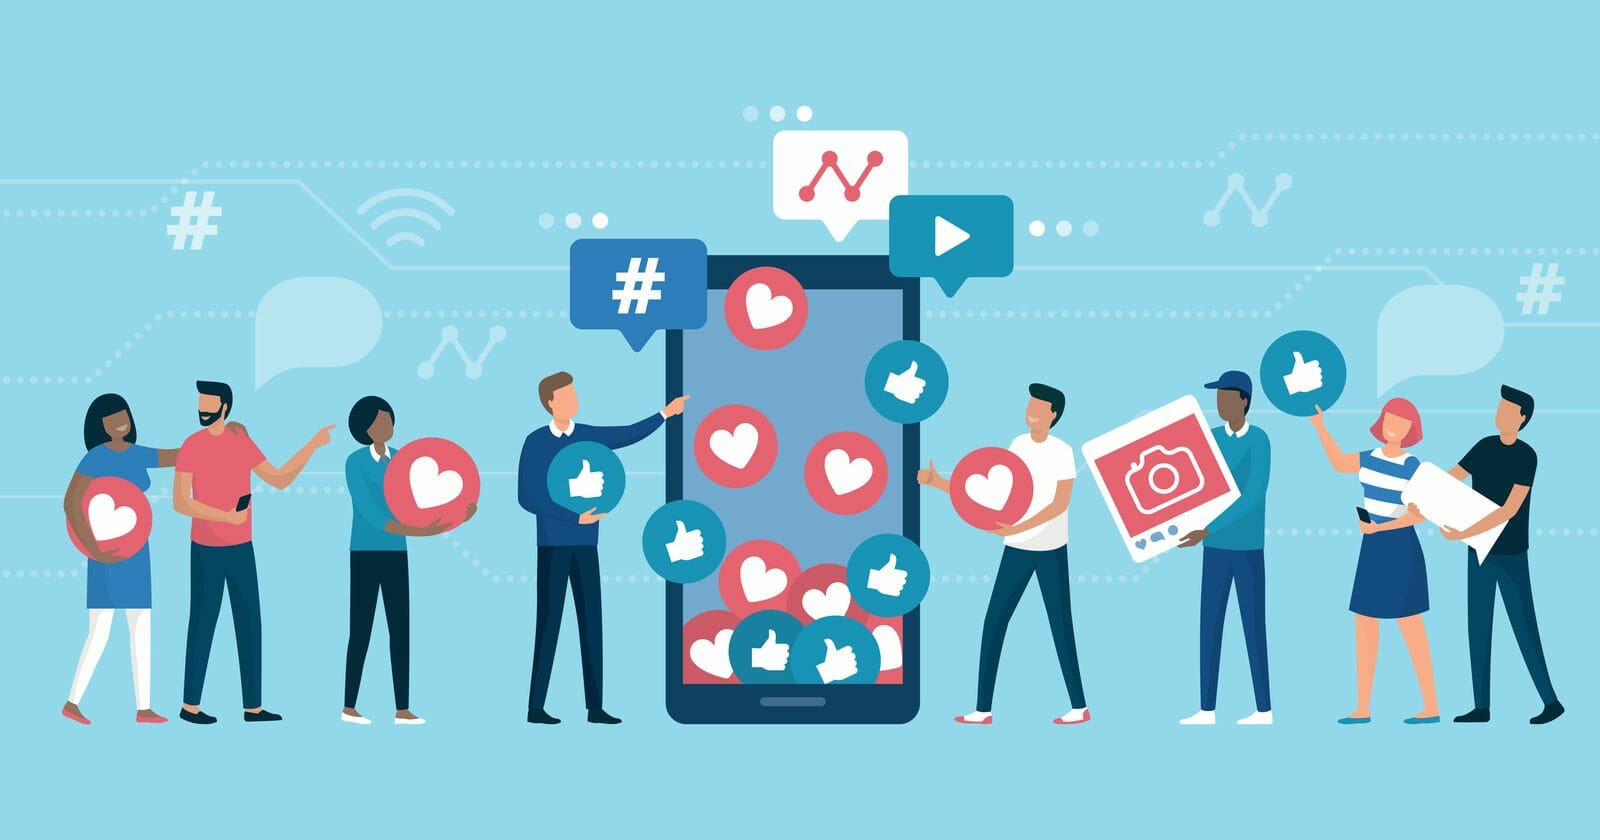 Optimize Your Social Media Marketing Efforts With These 5 Audience Engagement Tips